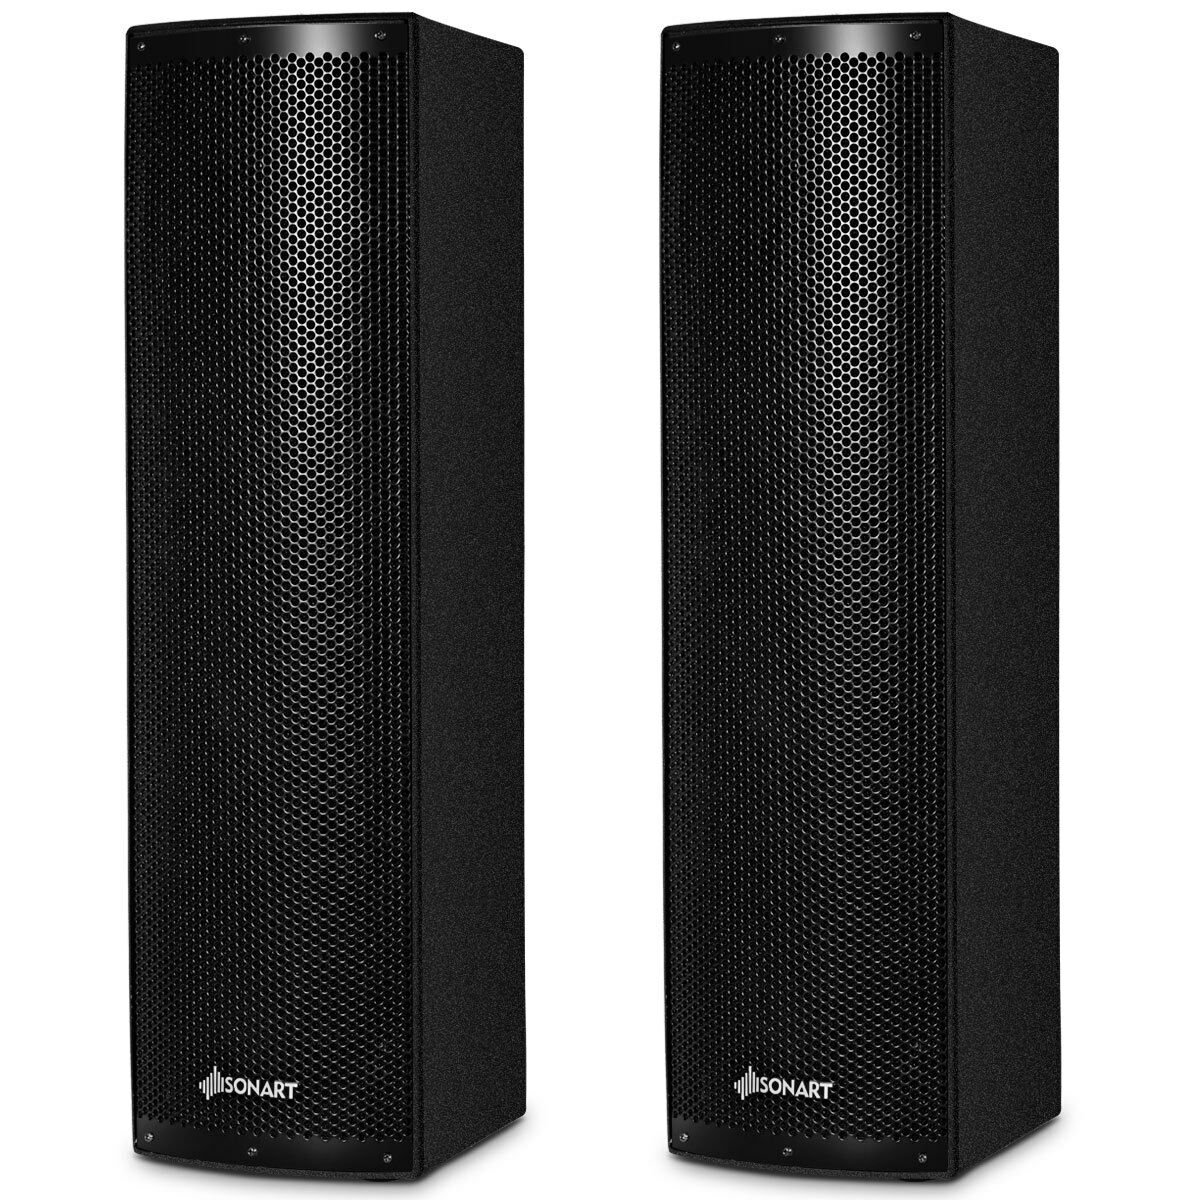 Costway Sonart 2000W Set of 2 Bi-Amplified Speakers PA System with 3-Channel & Stands